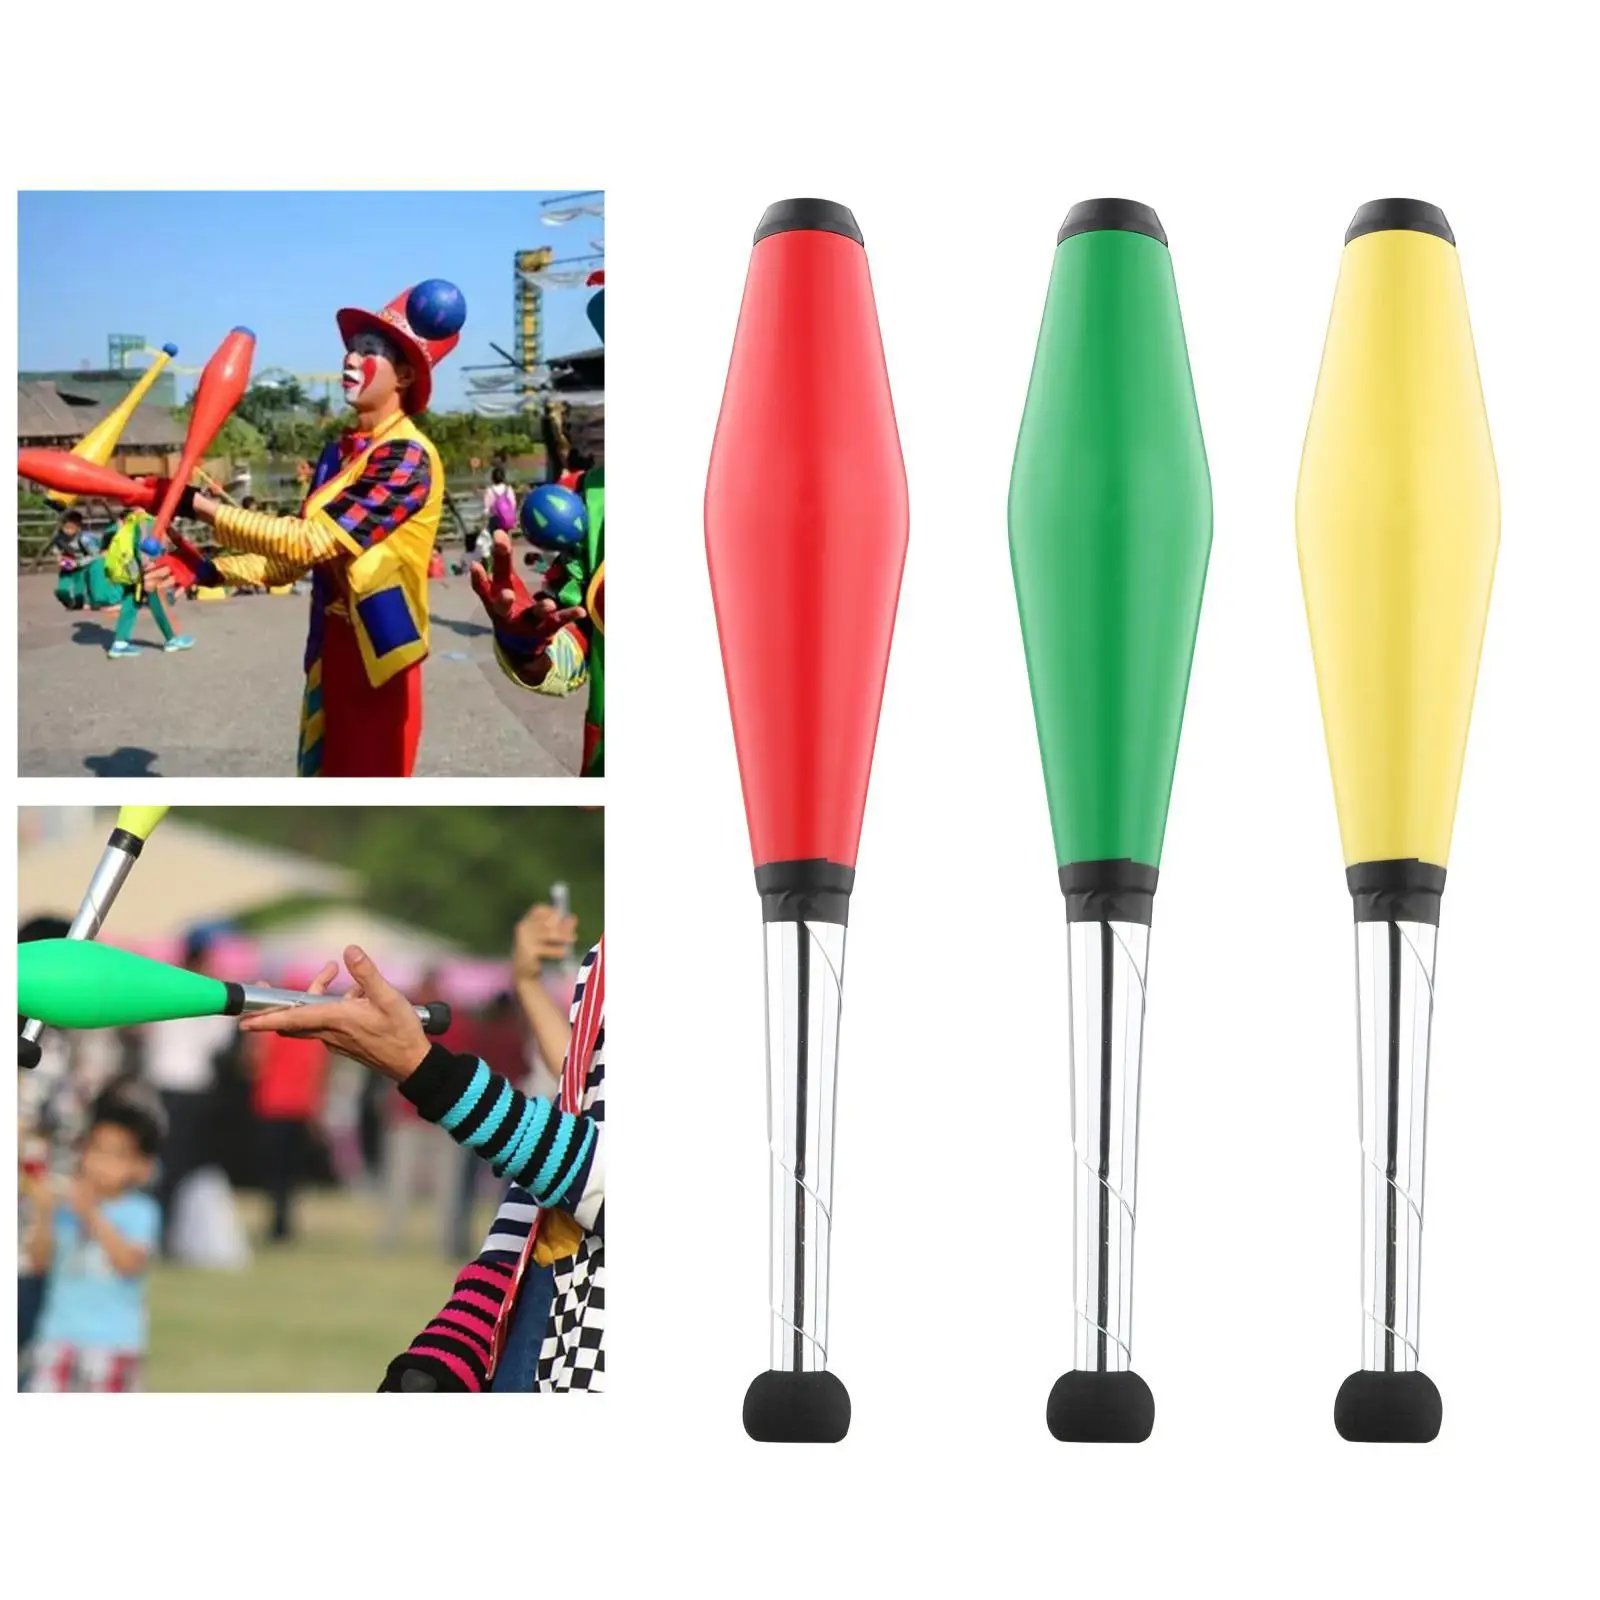 Professional Juggling Clubs Sticks Pins Ultralight for Clown Beginner Circus Props Comedy Kids Playing Toy